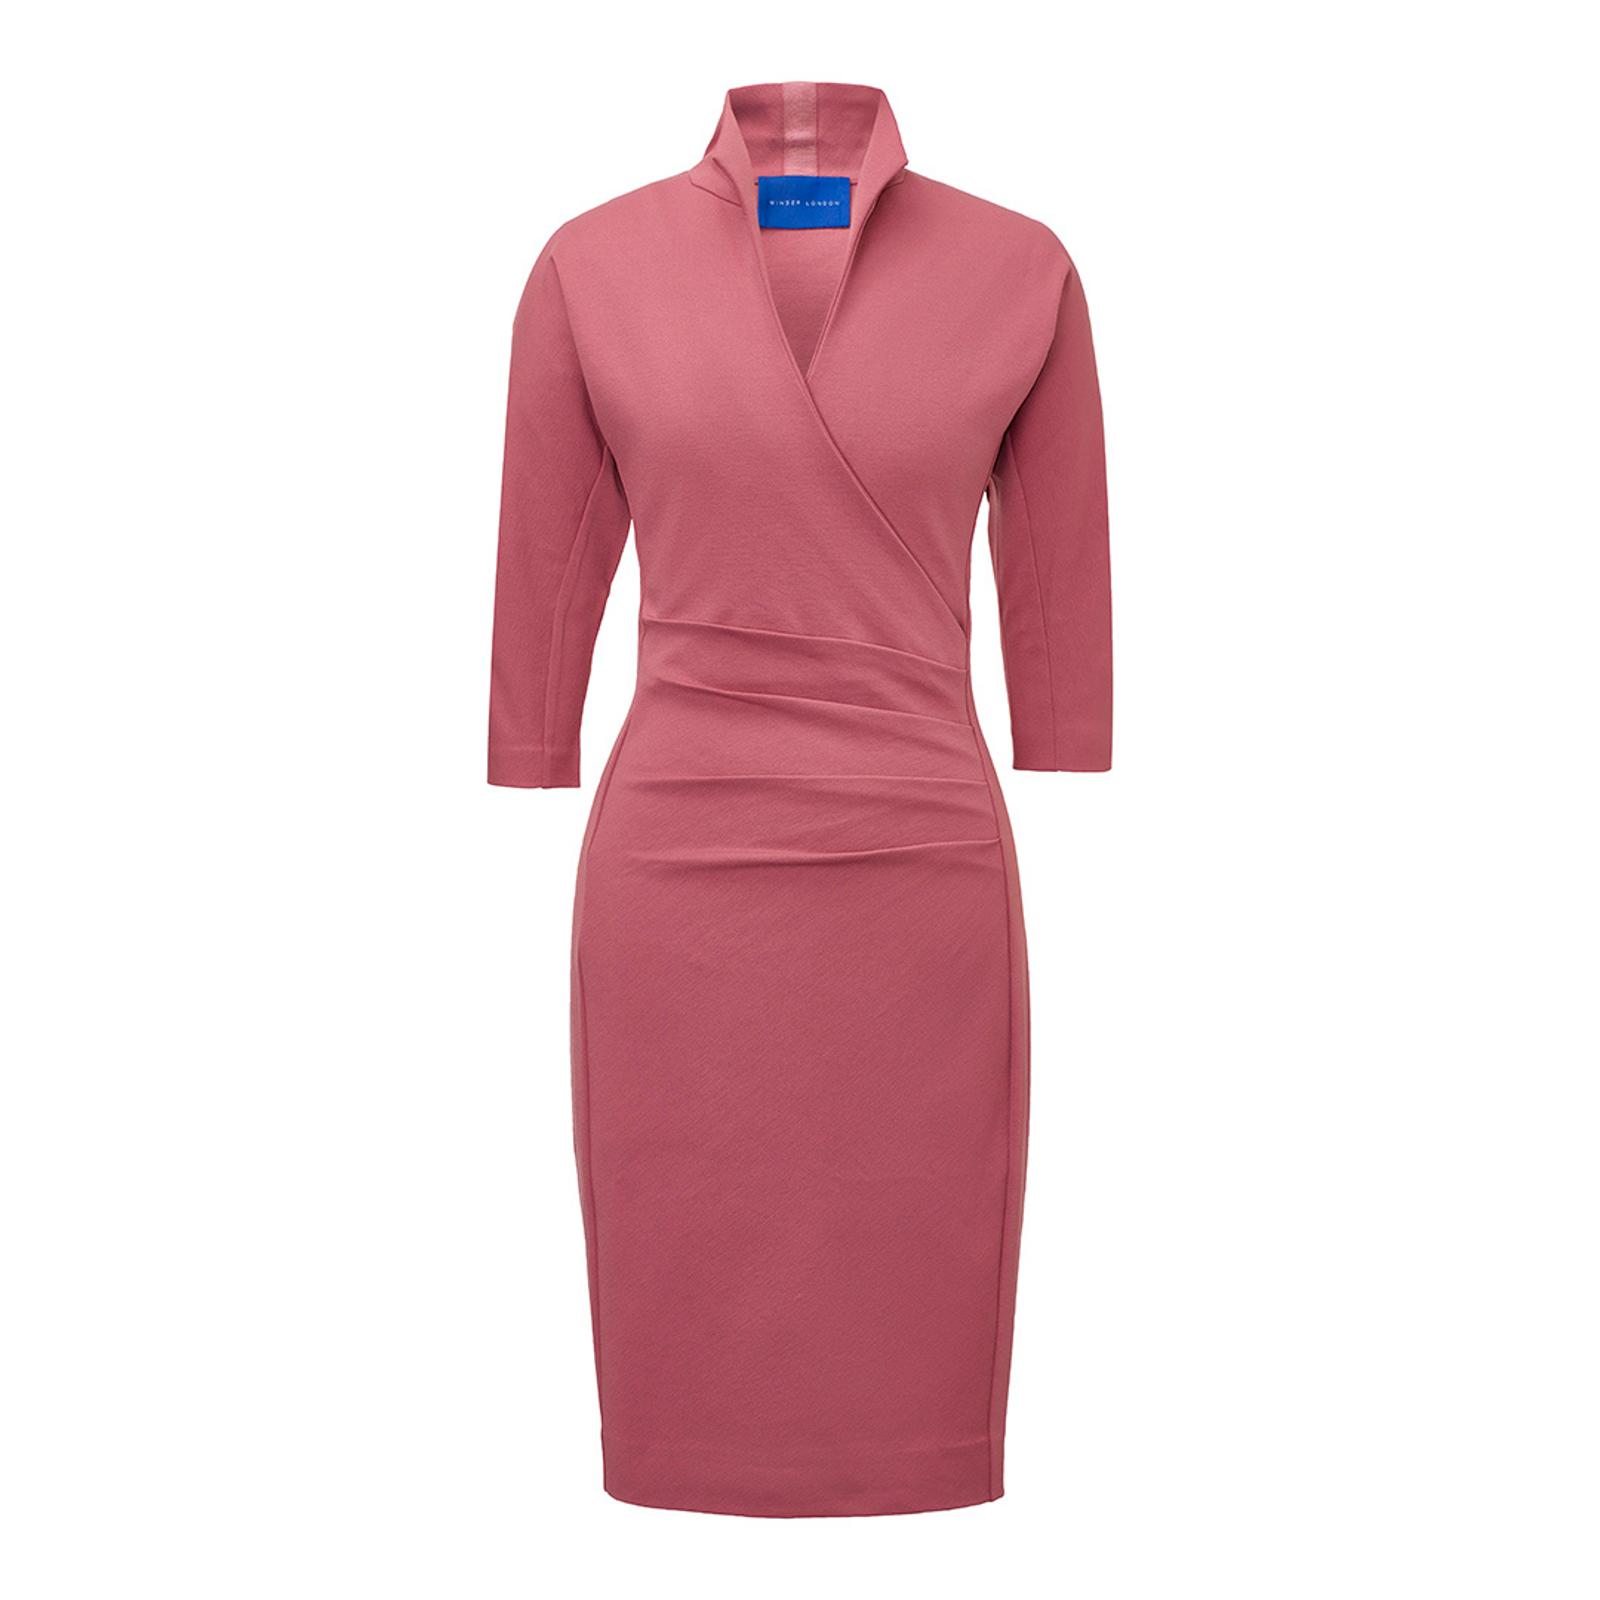 Mulberry Grace Miracle Dress - BrandAlley